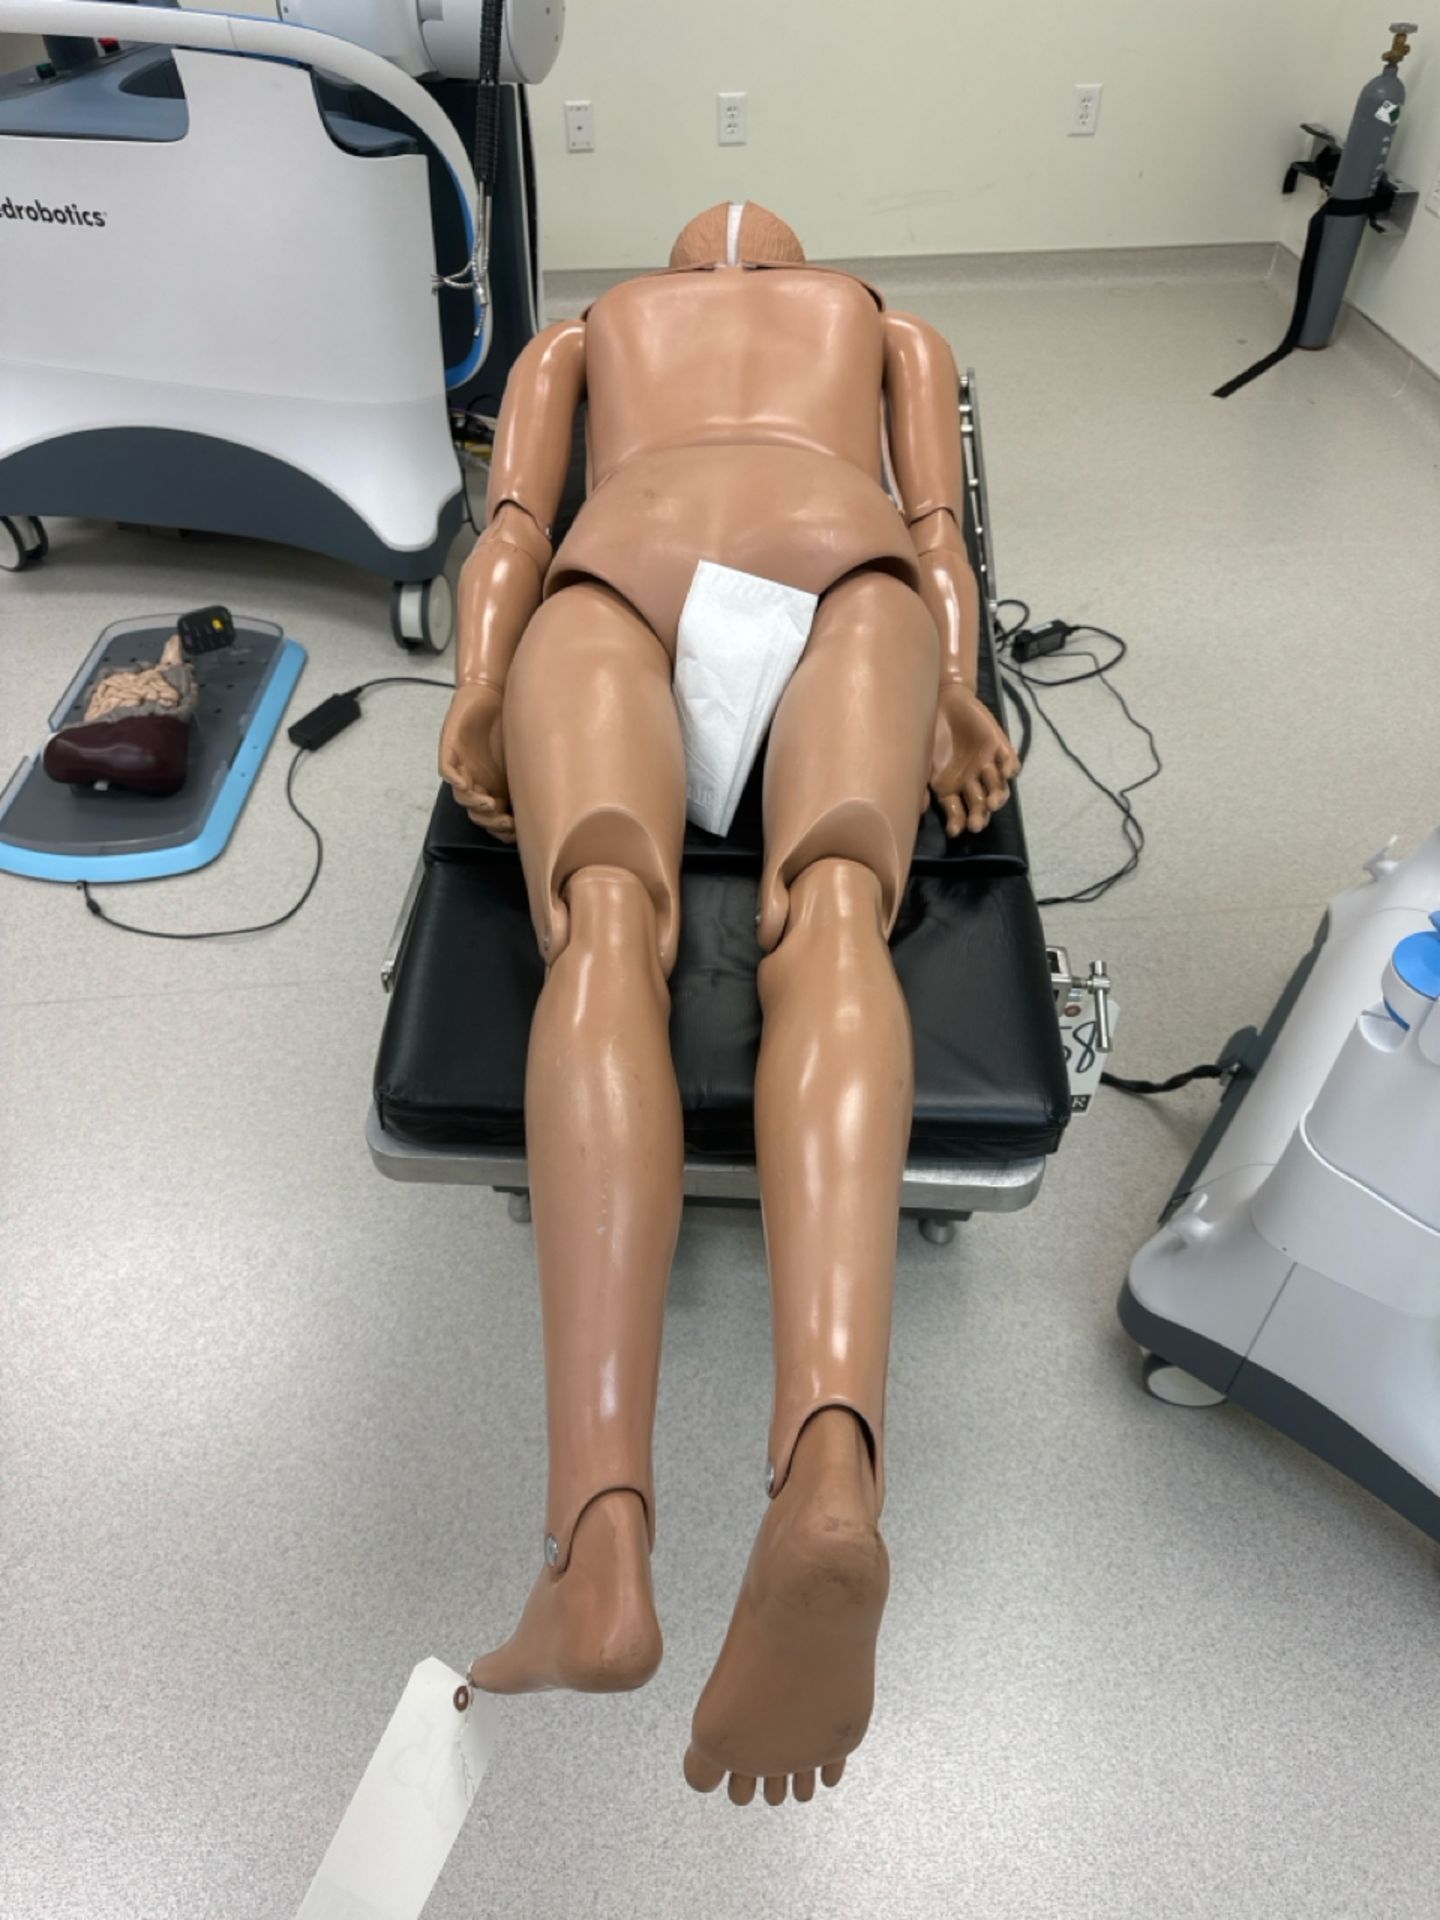 Universal Medical Human Mannequin - Image 5 of 6